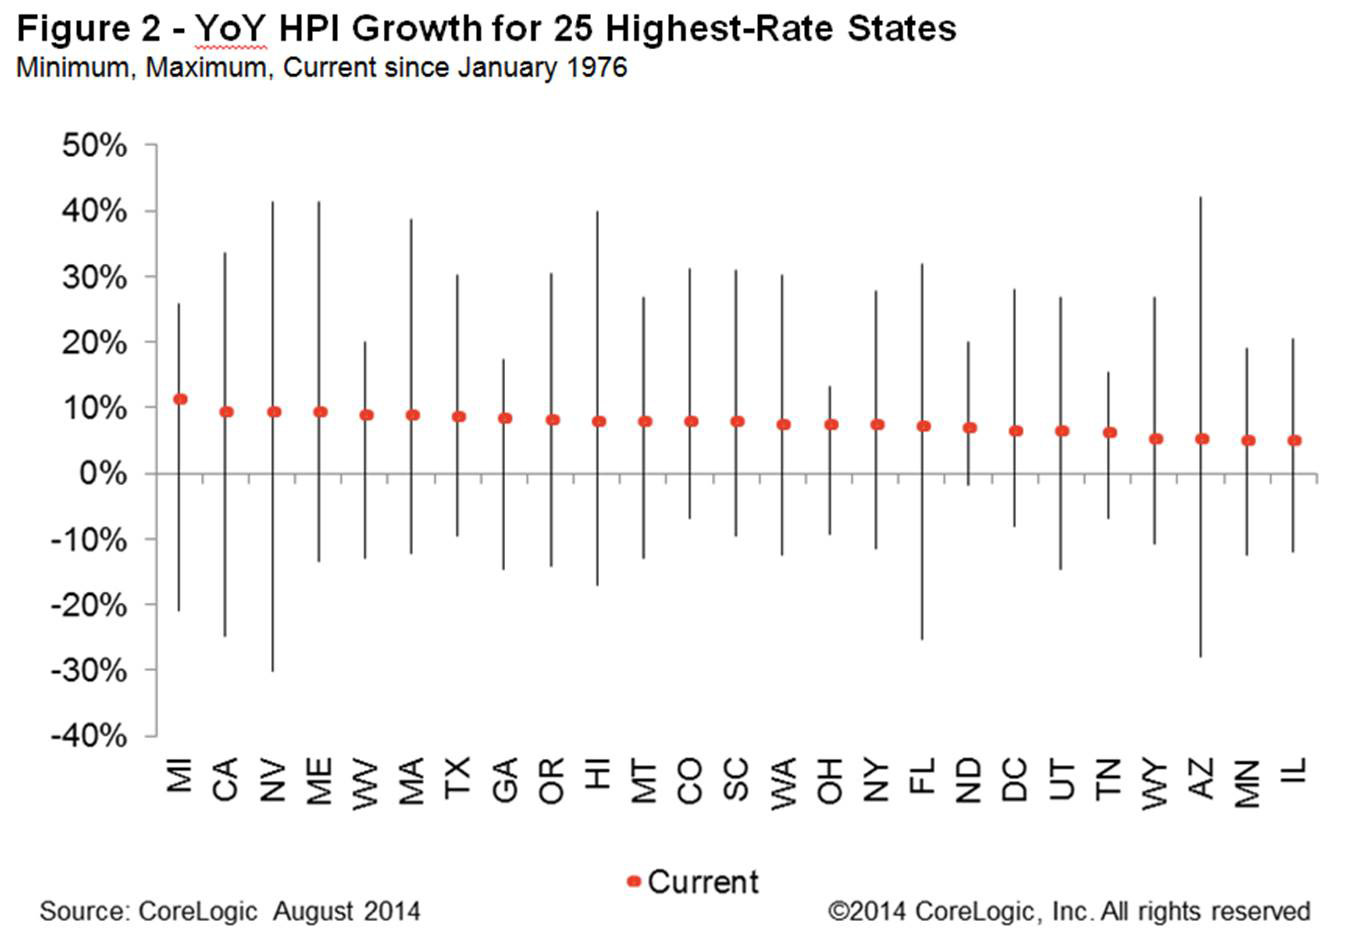 Figure 2: YoY HPI Growth for 25 Highest Rate States Min, Max, Current Since January 1976